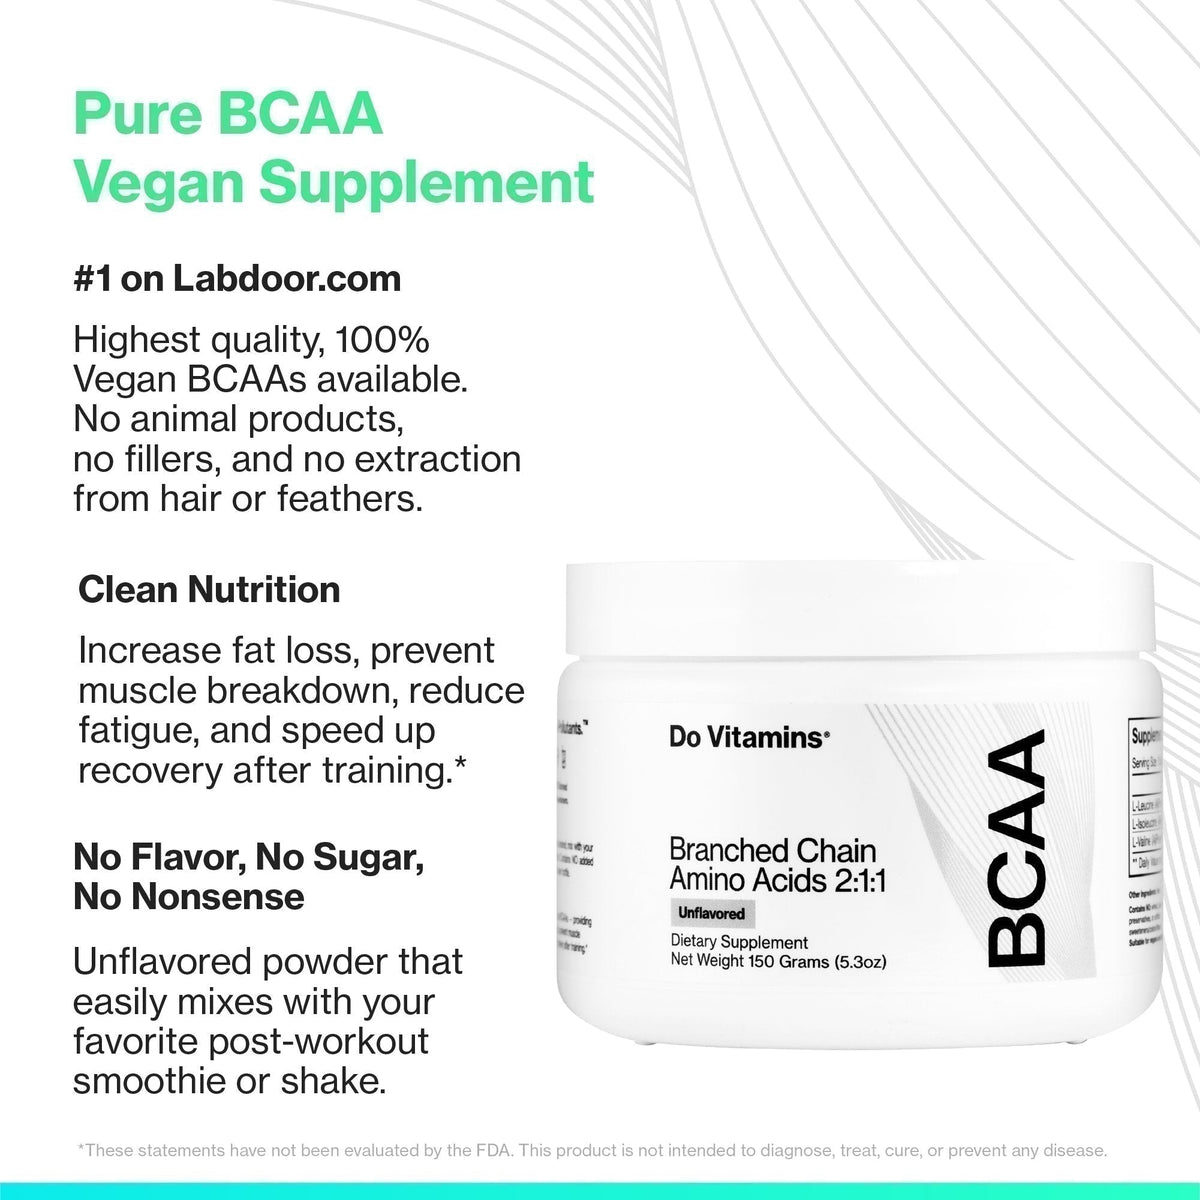 Branched Chain Amino Acids - BCAA Powder